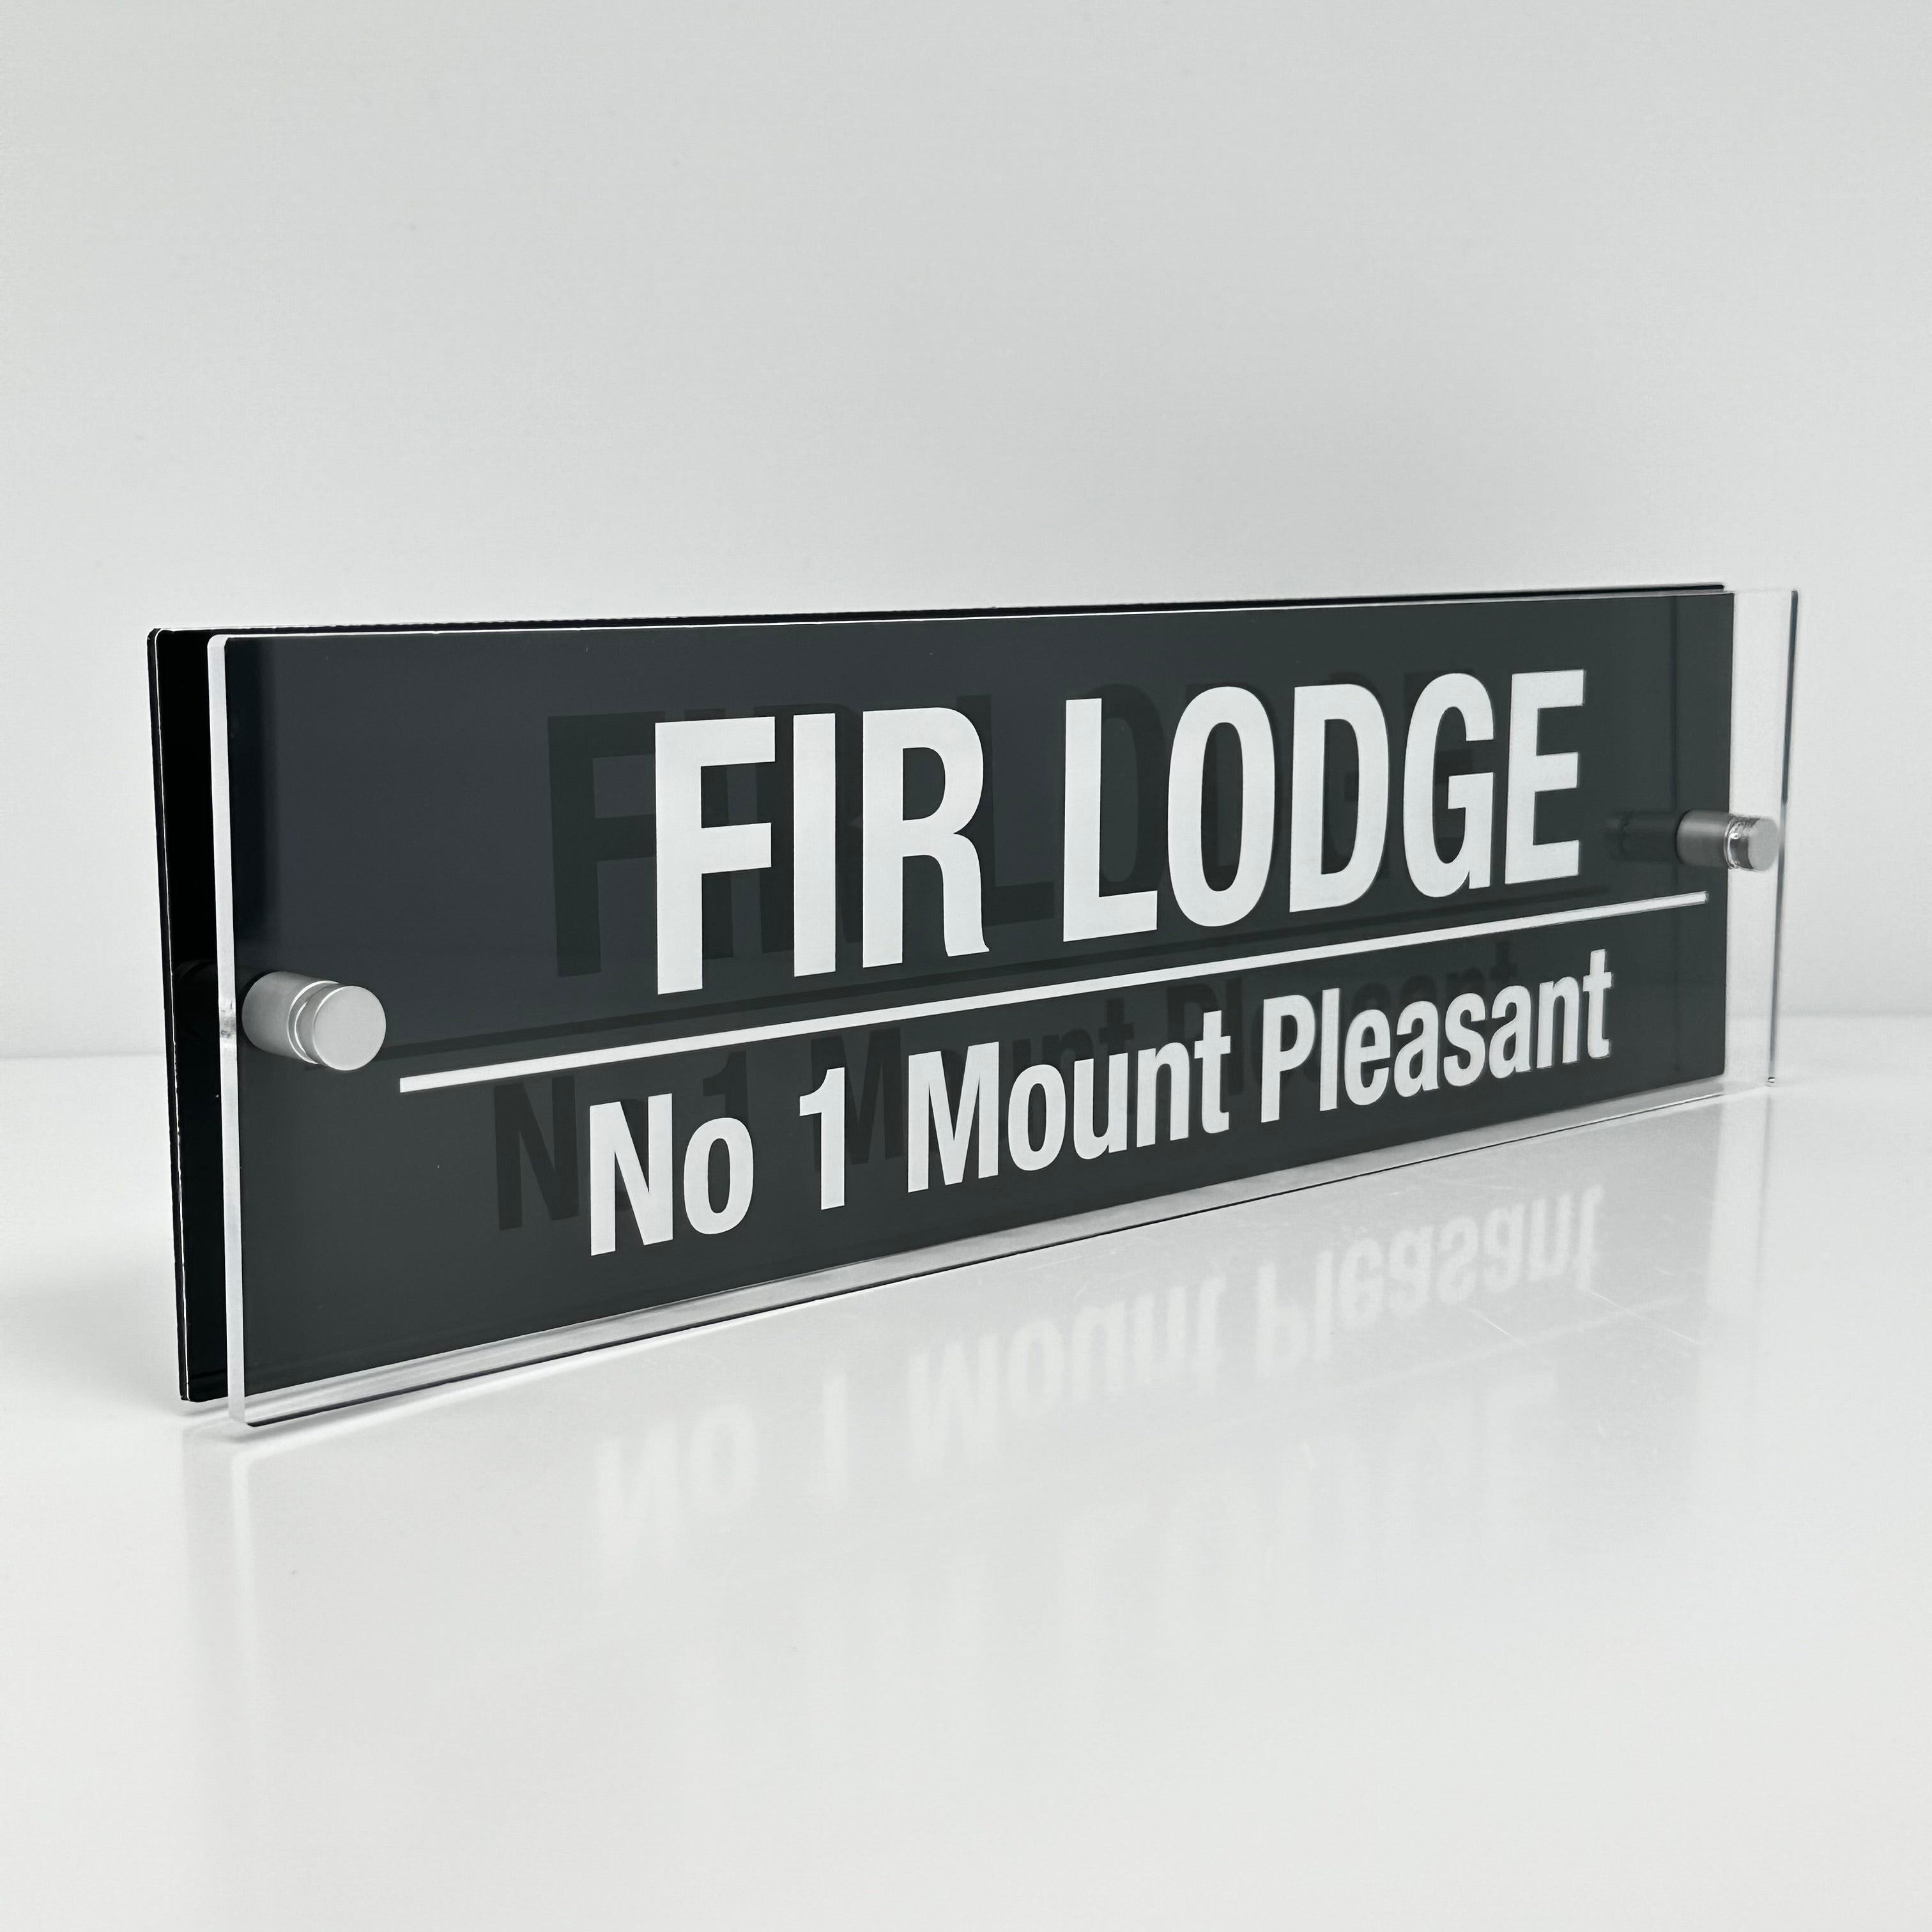 The Fir Lodge Modern House Sign with Perspex Acrylic Front, Anthracite Grey Rear Panel and Satin Silver Stand Off Fixings ( Size - 42cm x 12cm )